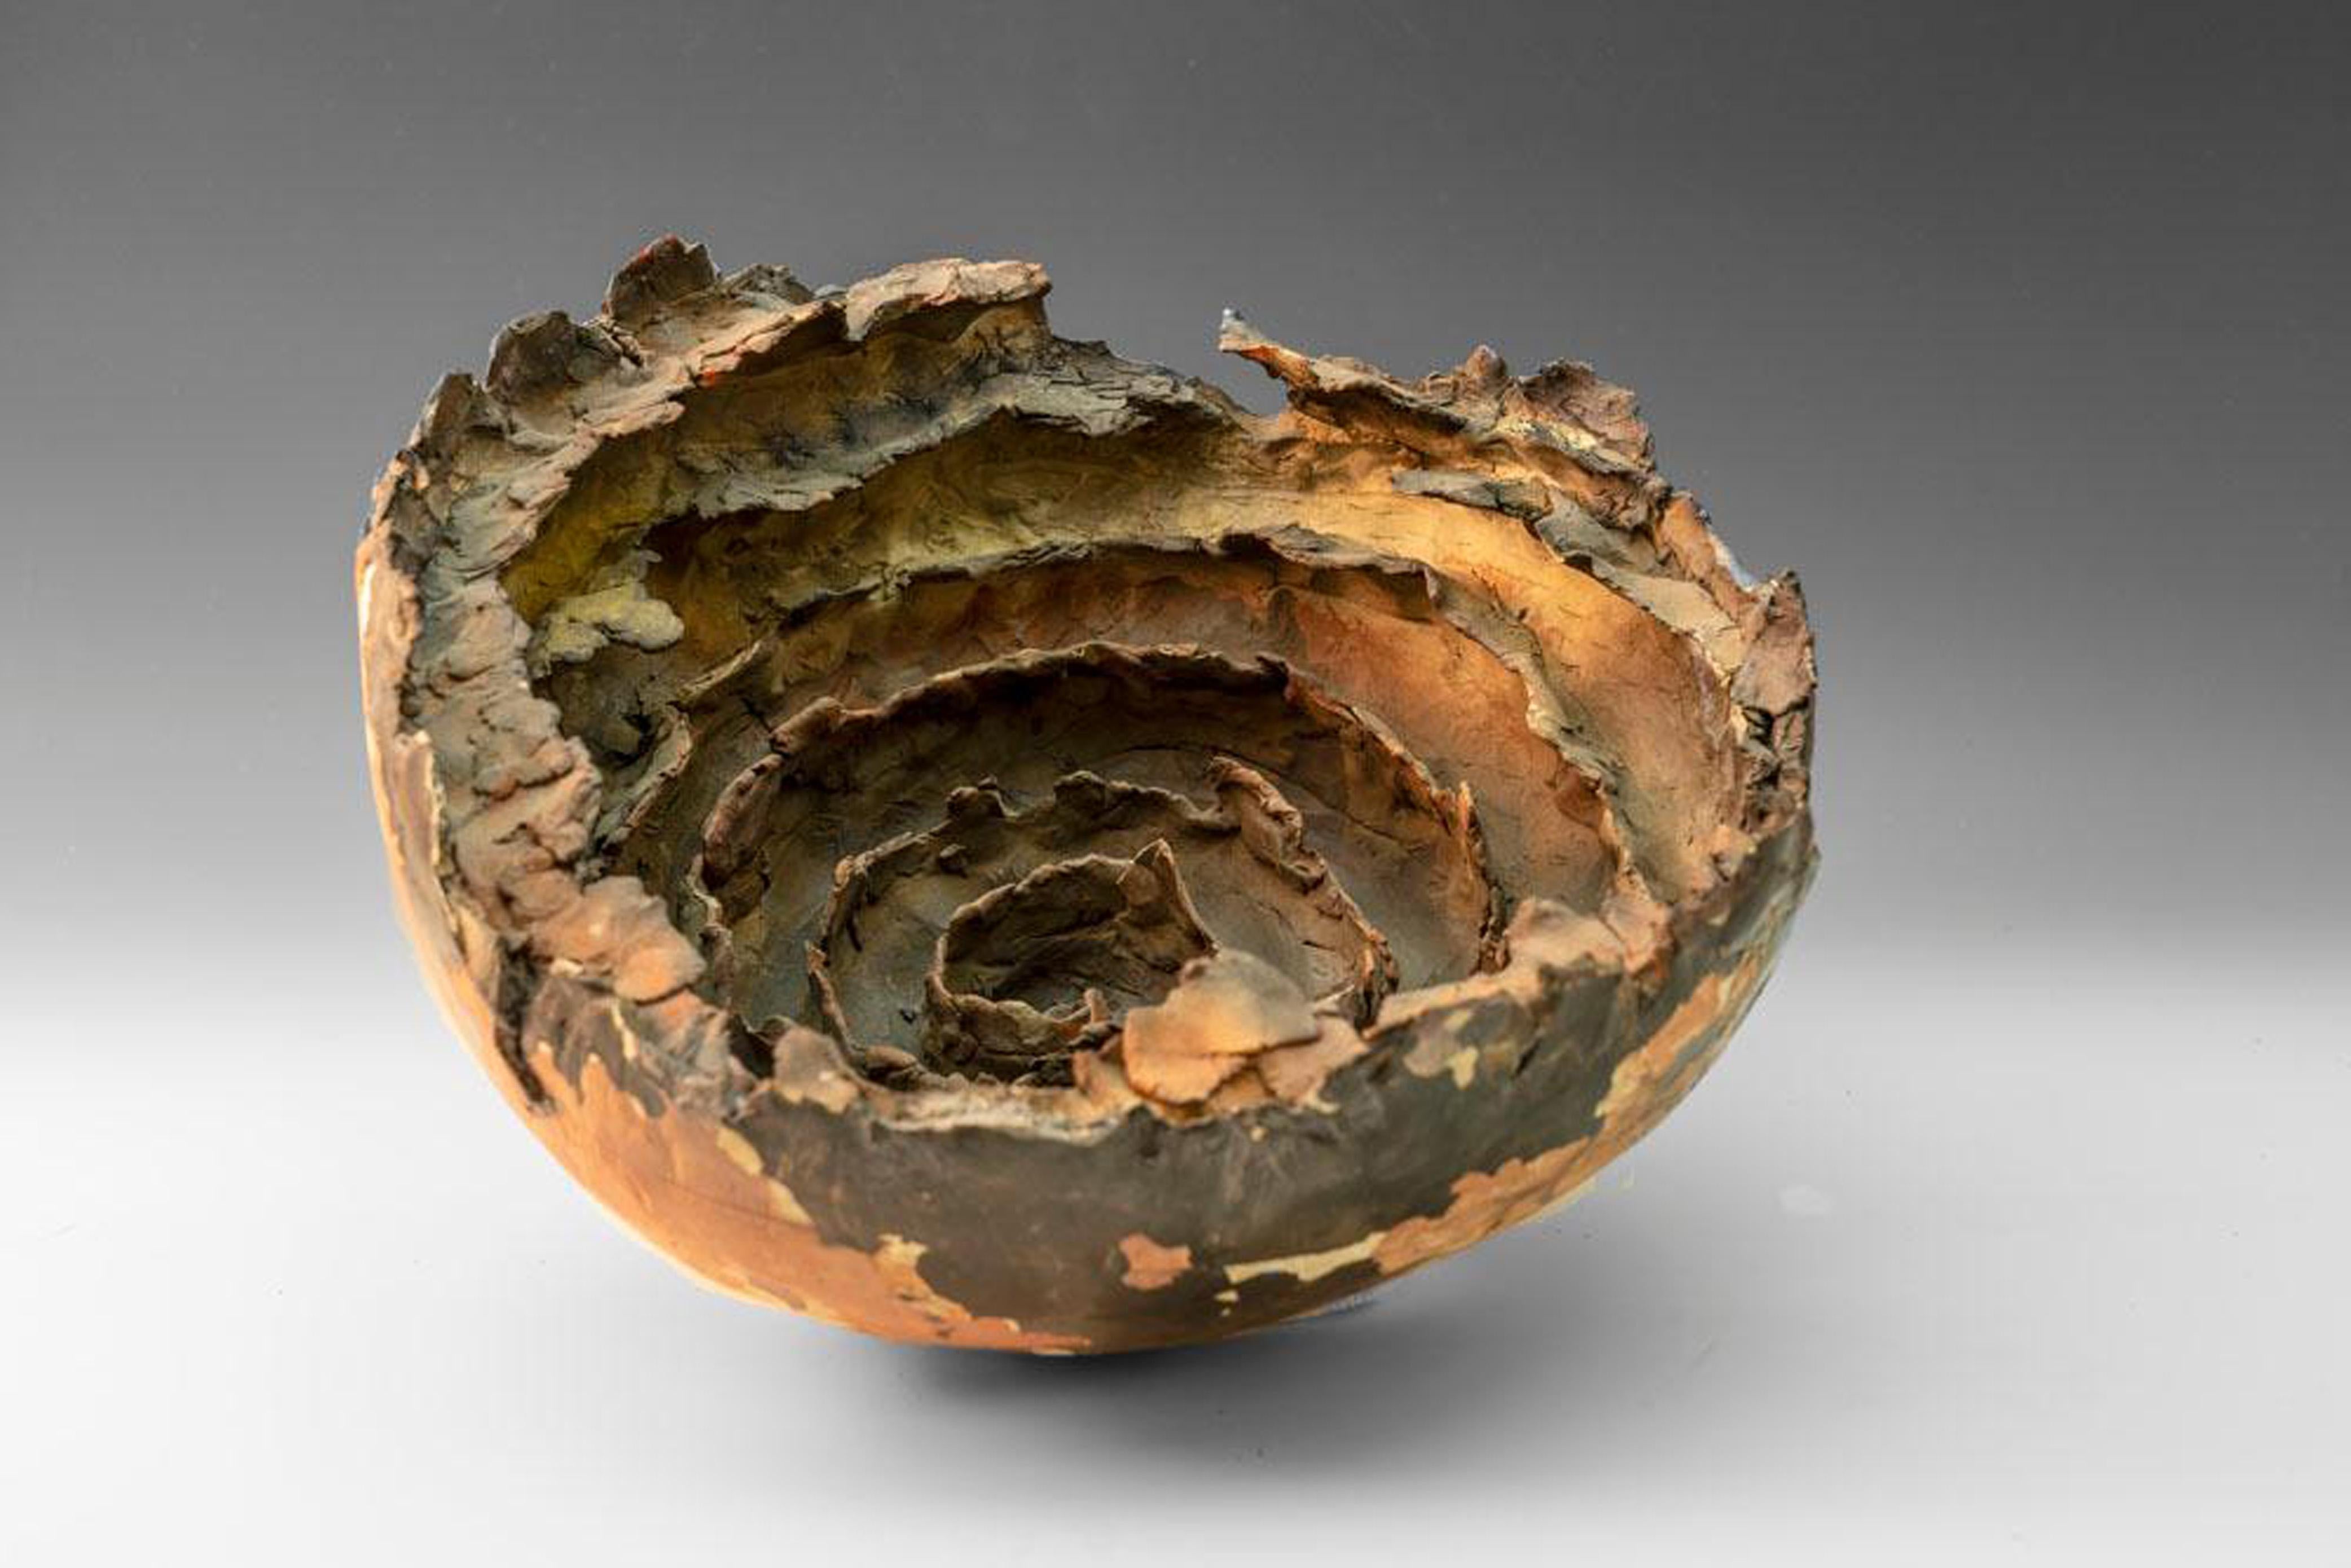 "Moon Crater", textured ceramic in golds and browns, embodies essential clay - Sculpture by Allan Drossman